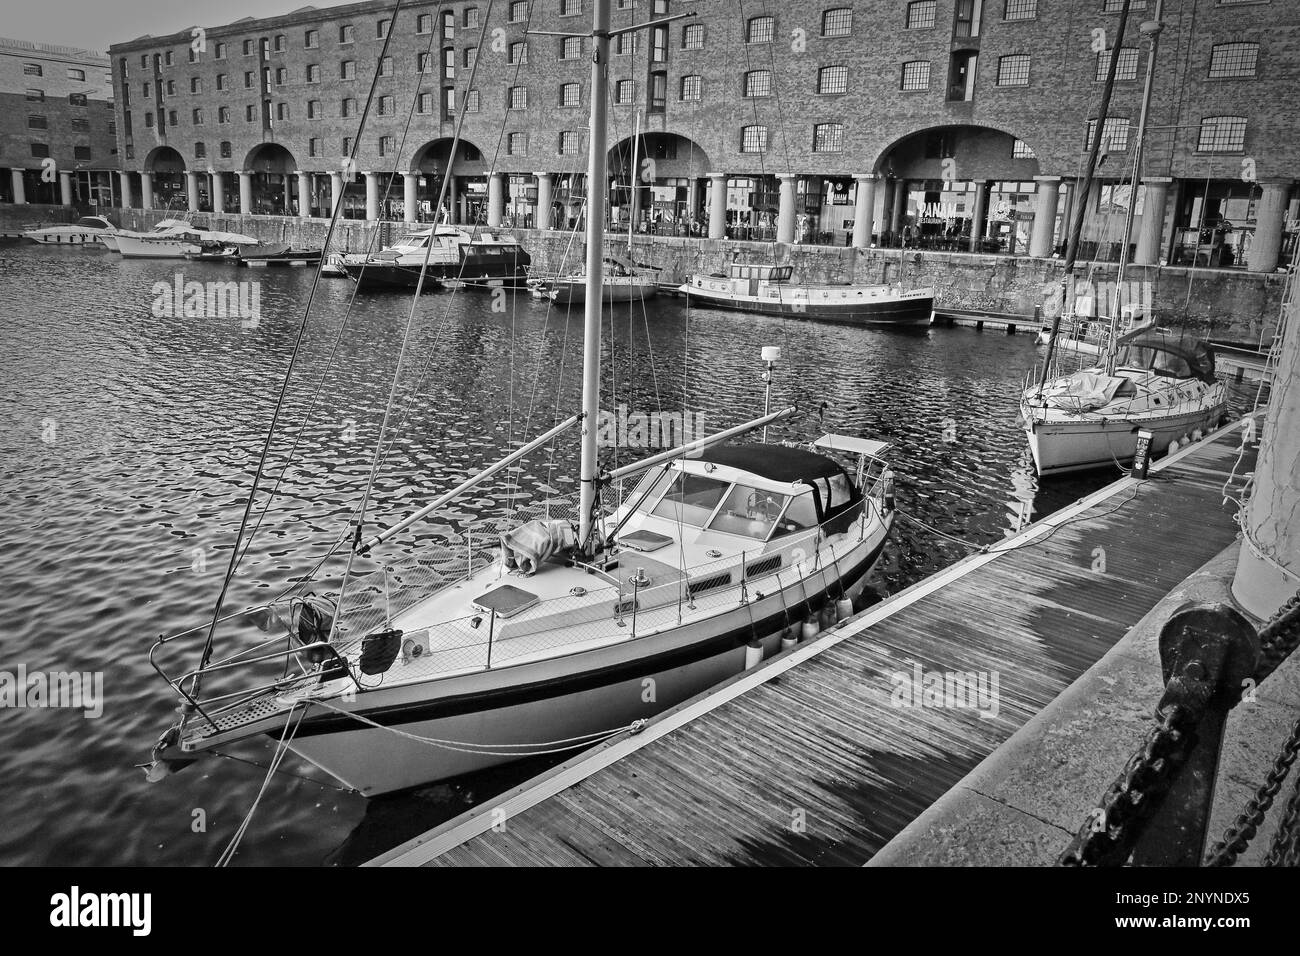 Monochrome moored boats at the historic royal Albert Dock, Pier Head, Liverpool, Merseyside, England, Great Britain Stock Photo